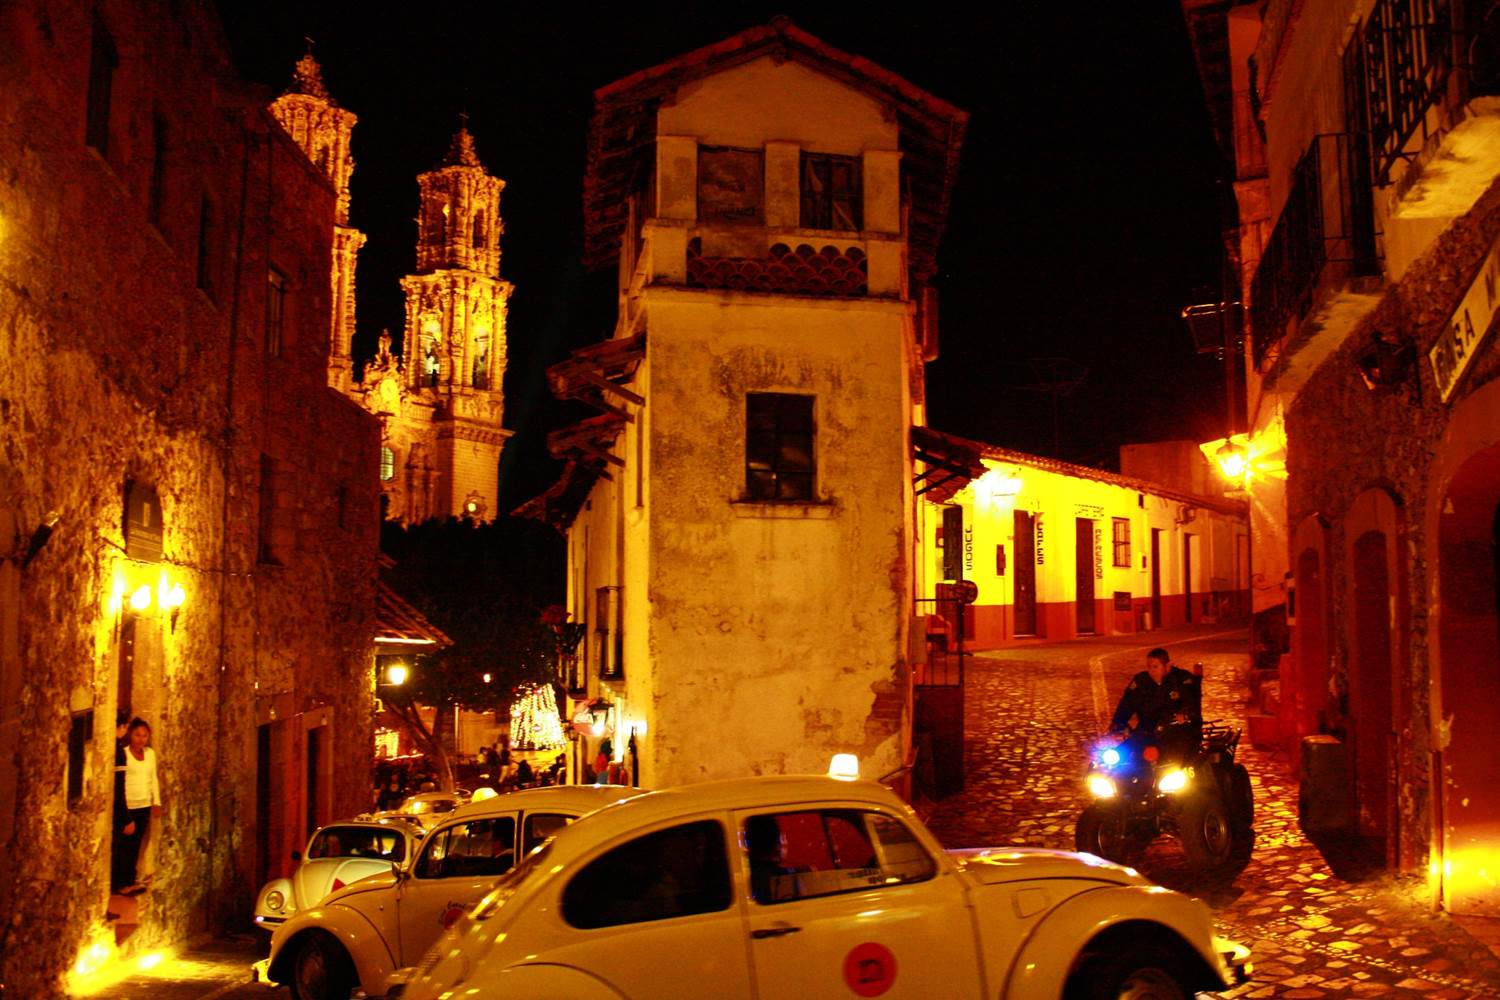 Taxco´s beetle taxi rushing through its tiny streets